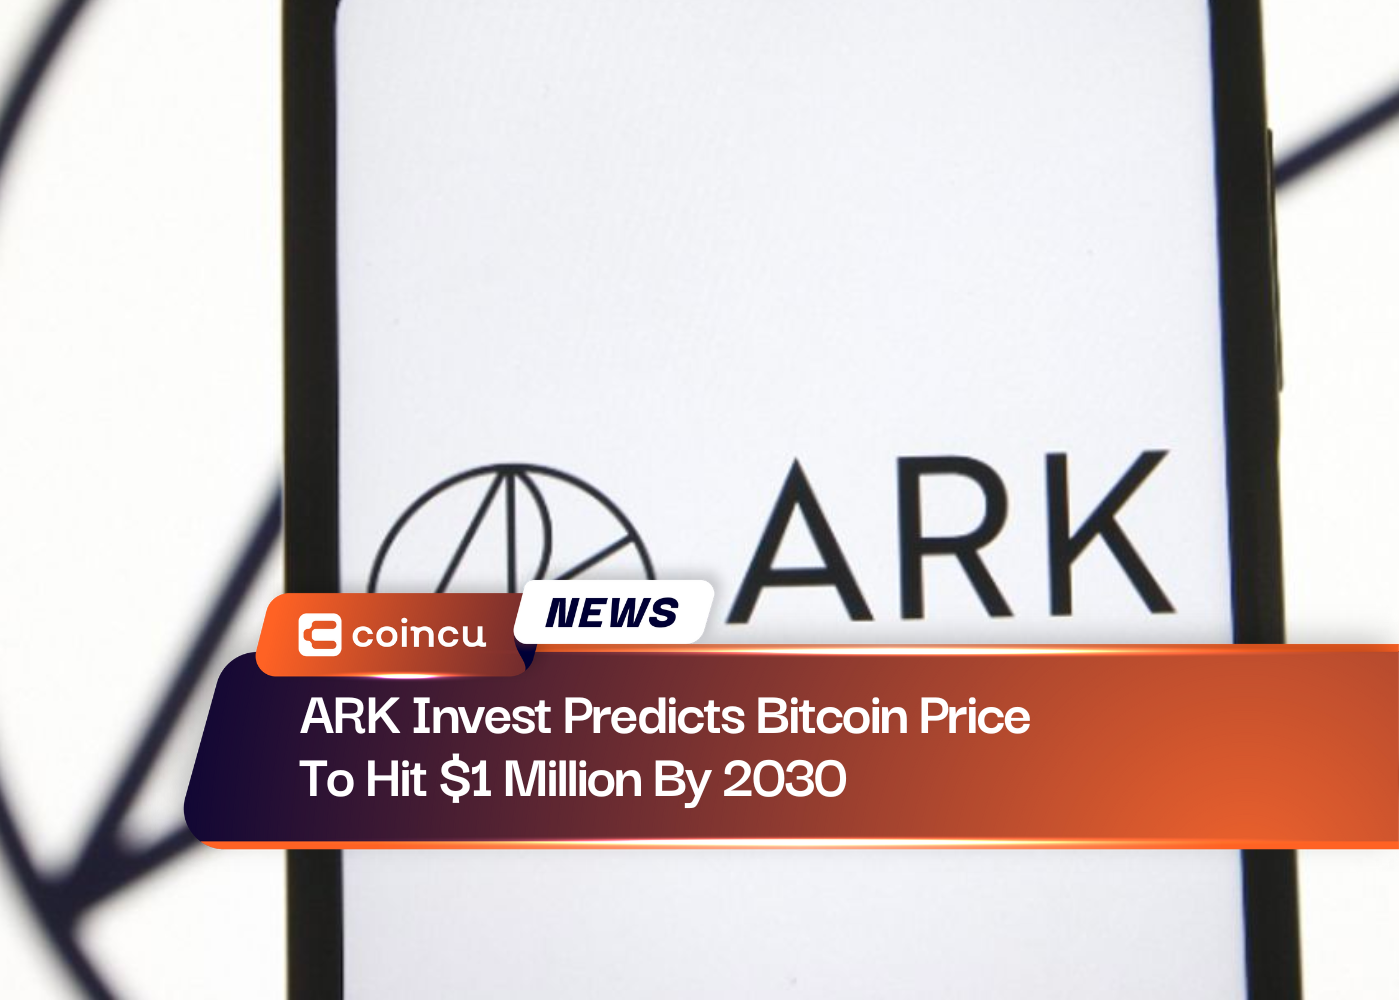 ARK Invest Predicts Bitcoin Price To Hit $1 Million By 2030